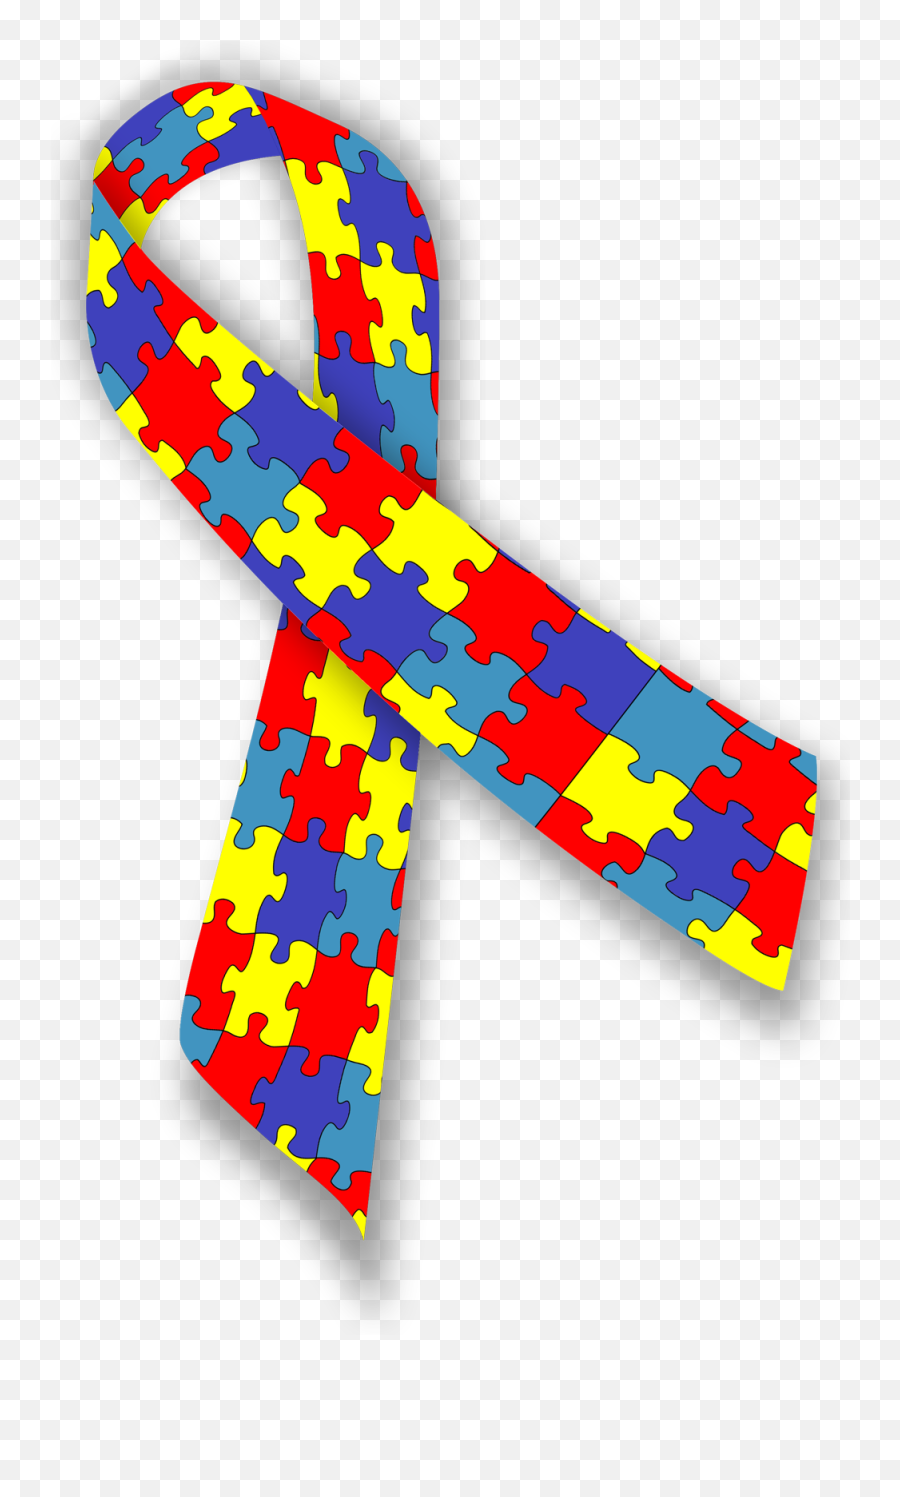 Why You Need To Stop Using The Puzzle Piece To Represent - Autism Spectrum Disorder Ribbon Emoji,Emoji Puzzles